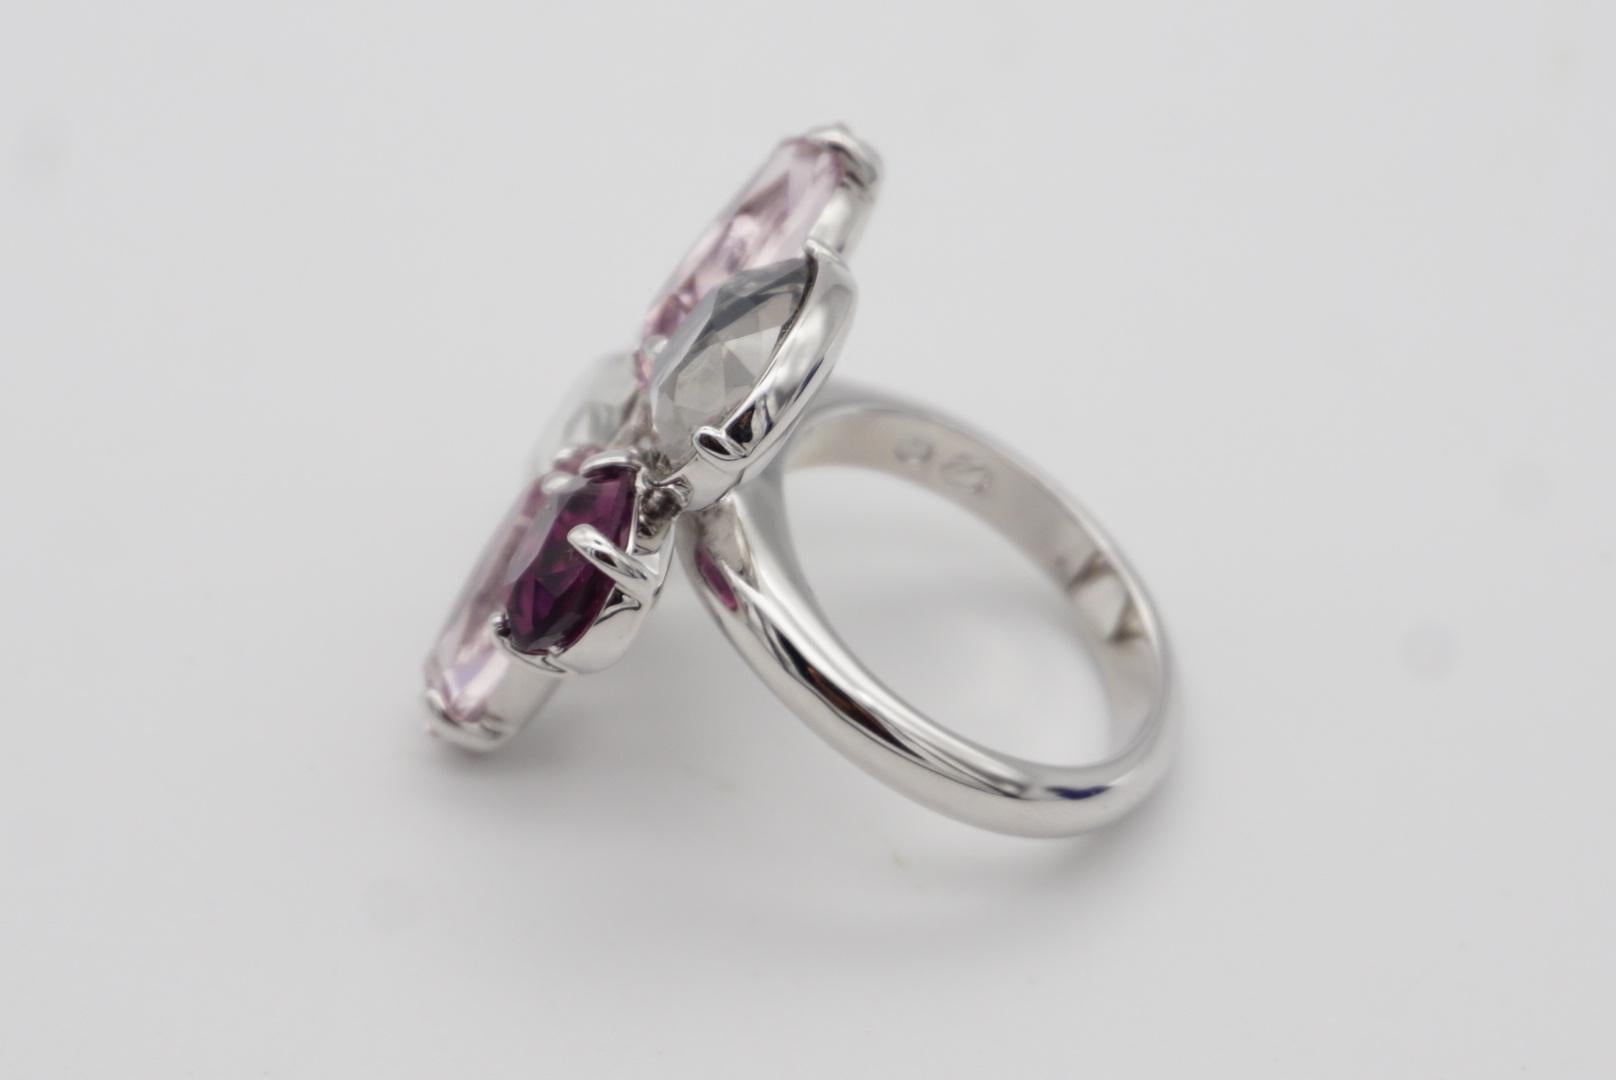 Swarovski Nirvana Cocktail Purple Clear Flower Ring, Silver, Size 58, UK P / Q For Sale 2